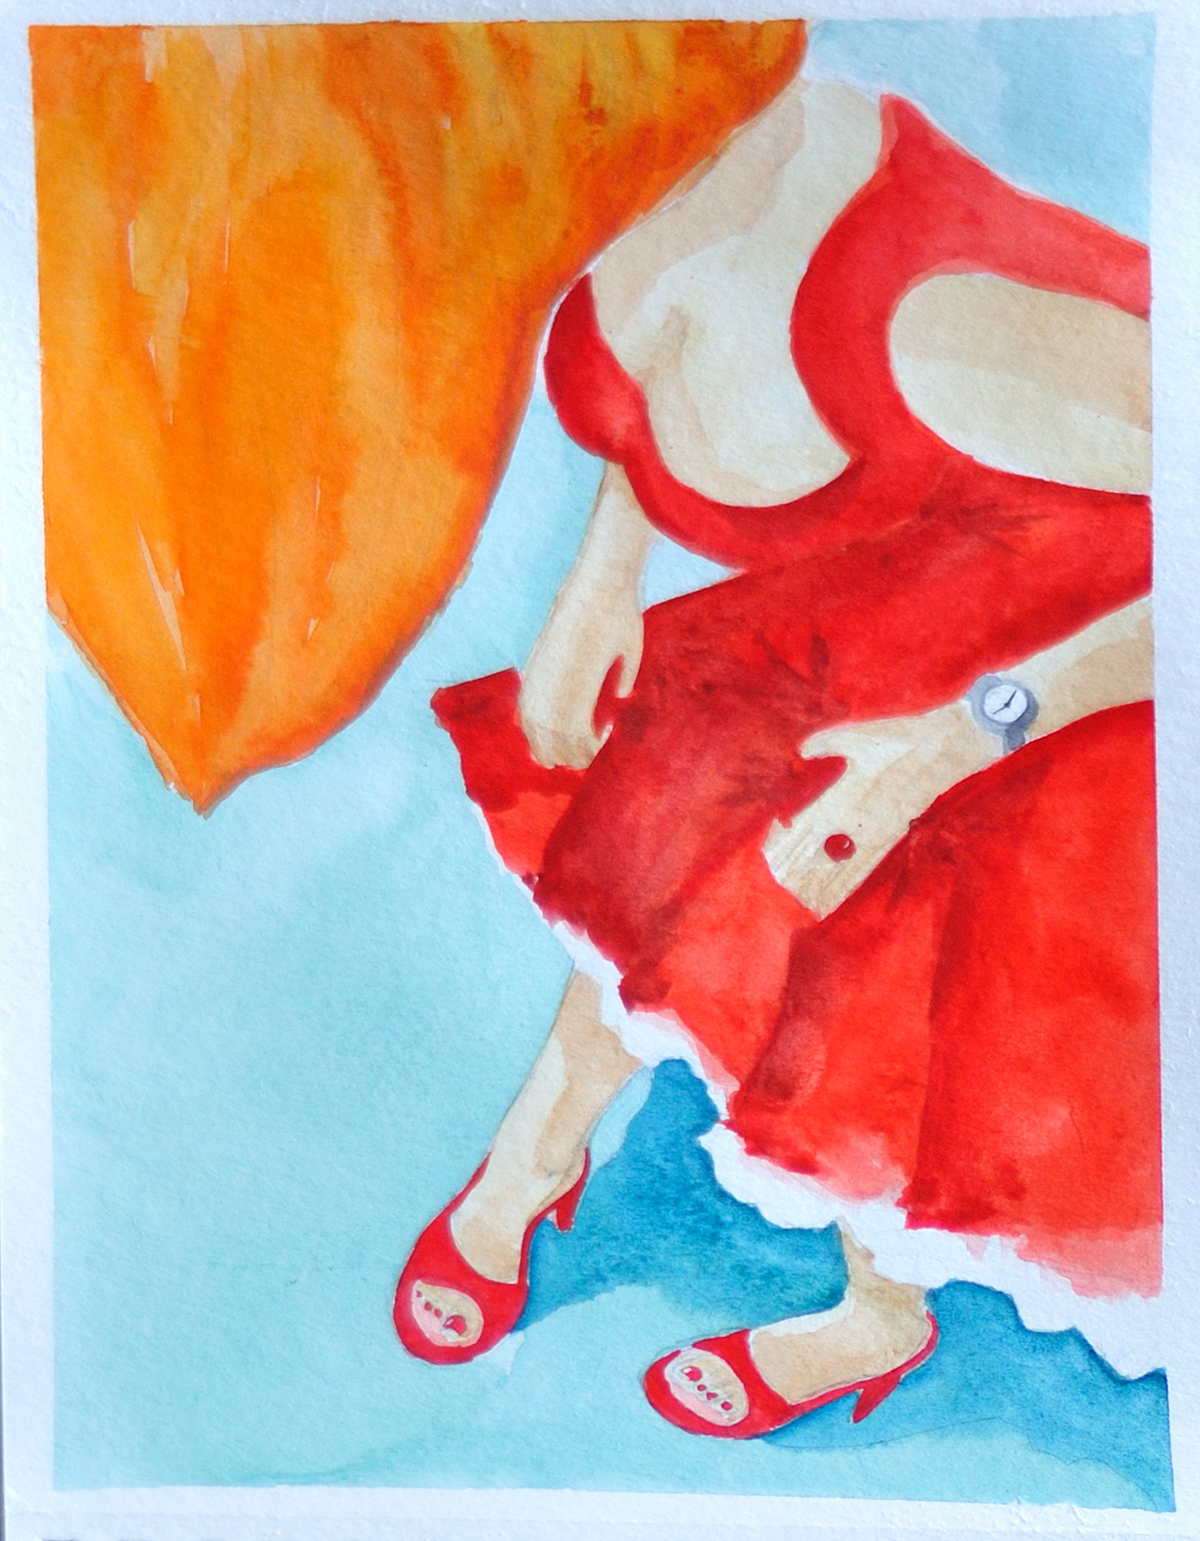 red dress woman shoes